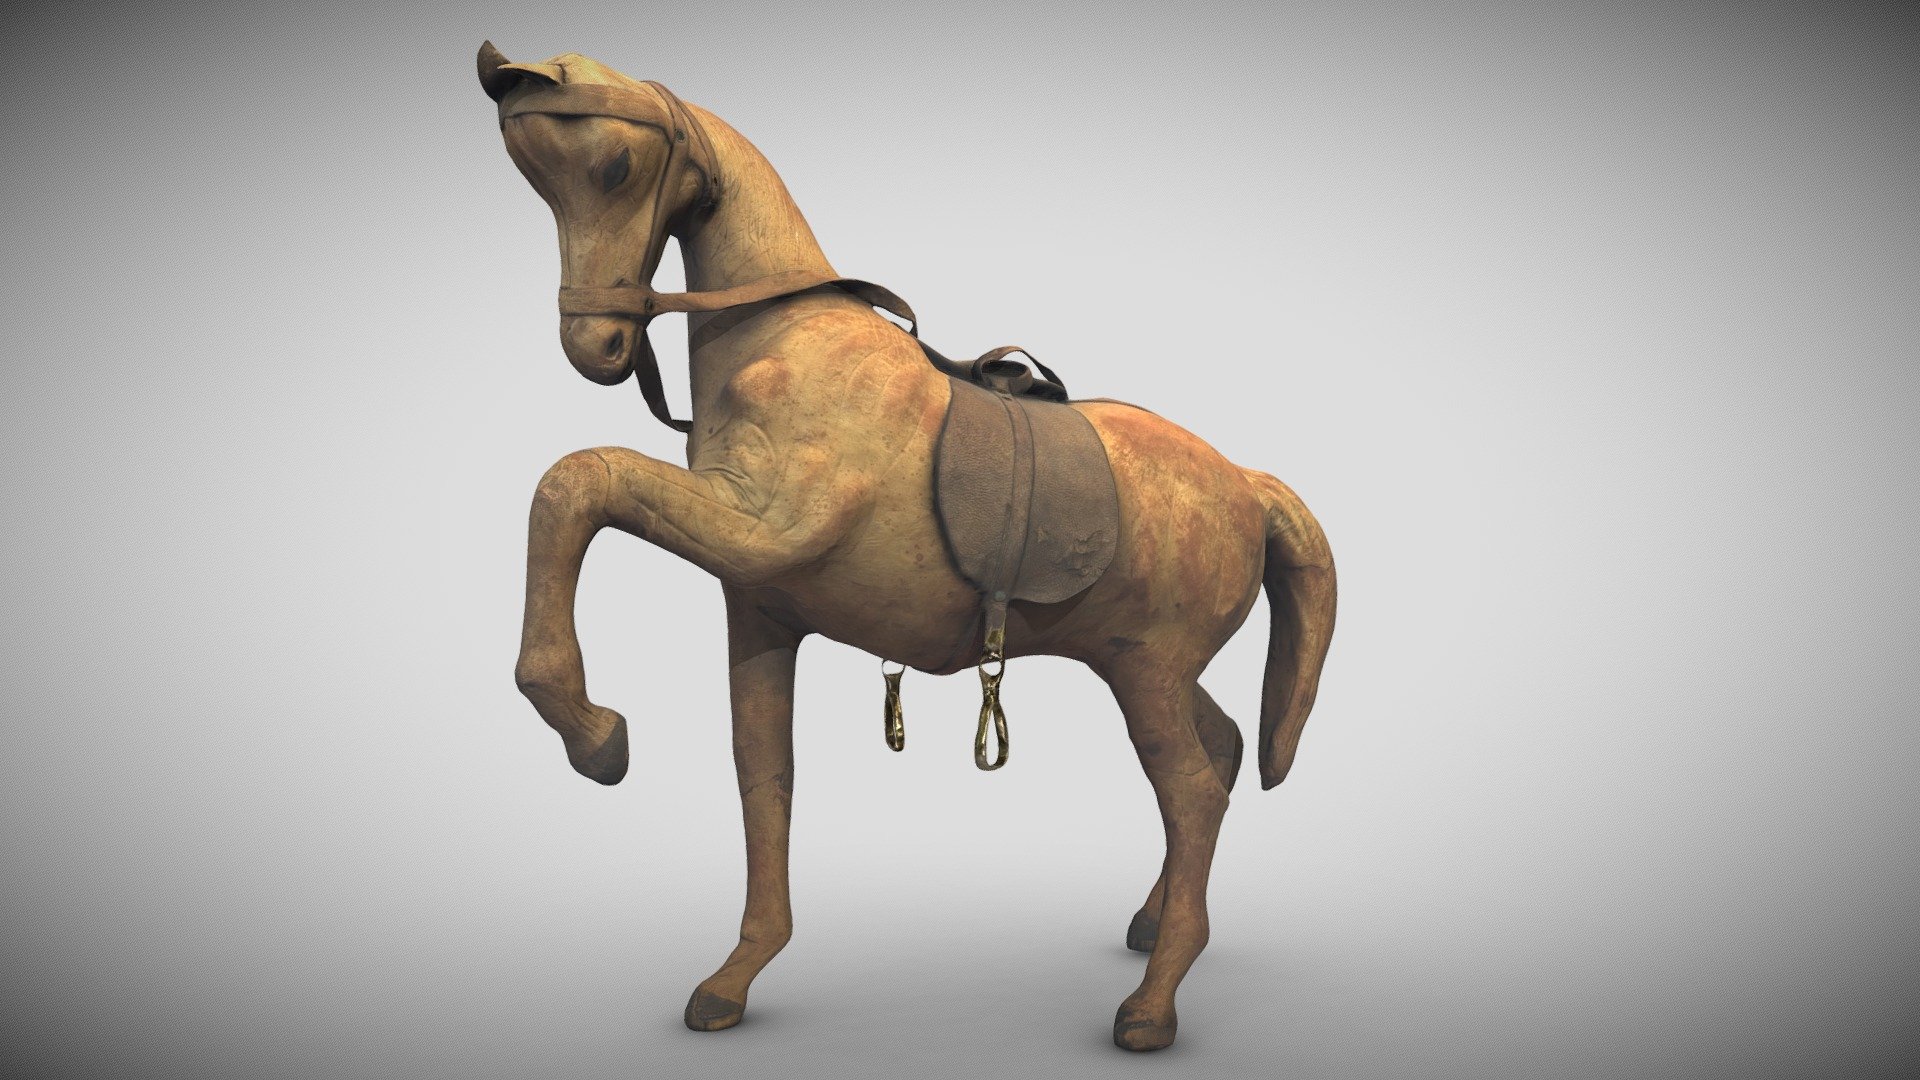 Upon request, we scanned this old horse figure, loaded it into RC and calculated it - Old Horse Figure (Photogrammetry) - Buy Royalty Free 3D model by Meshfinder 3d model